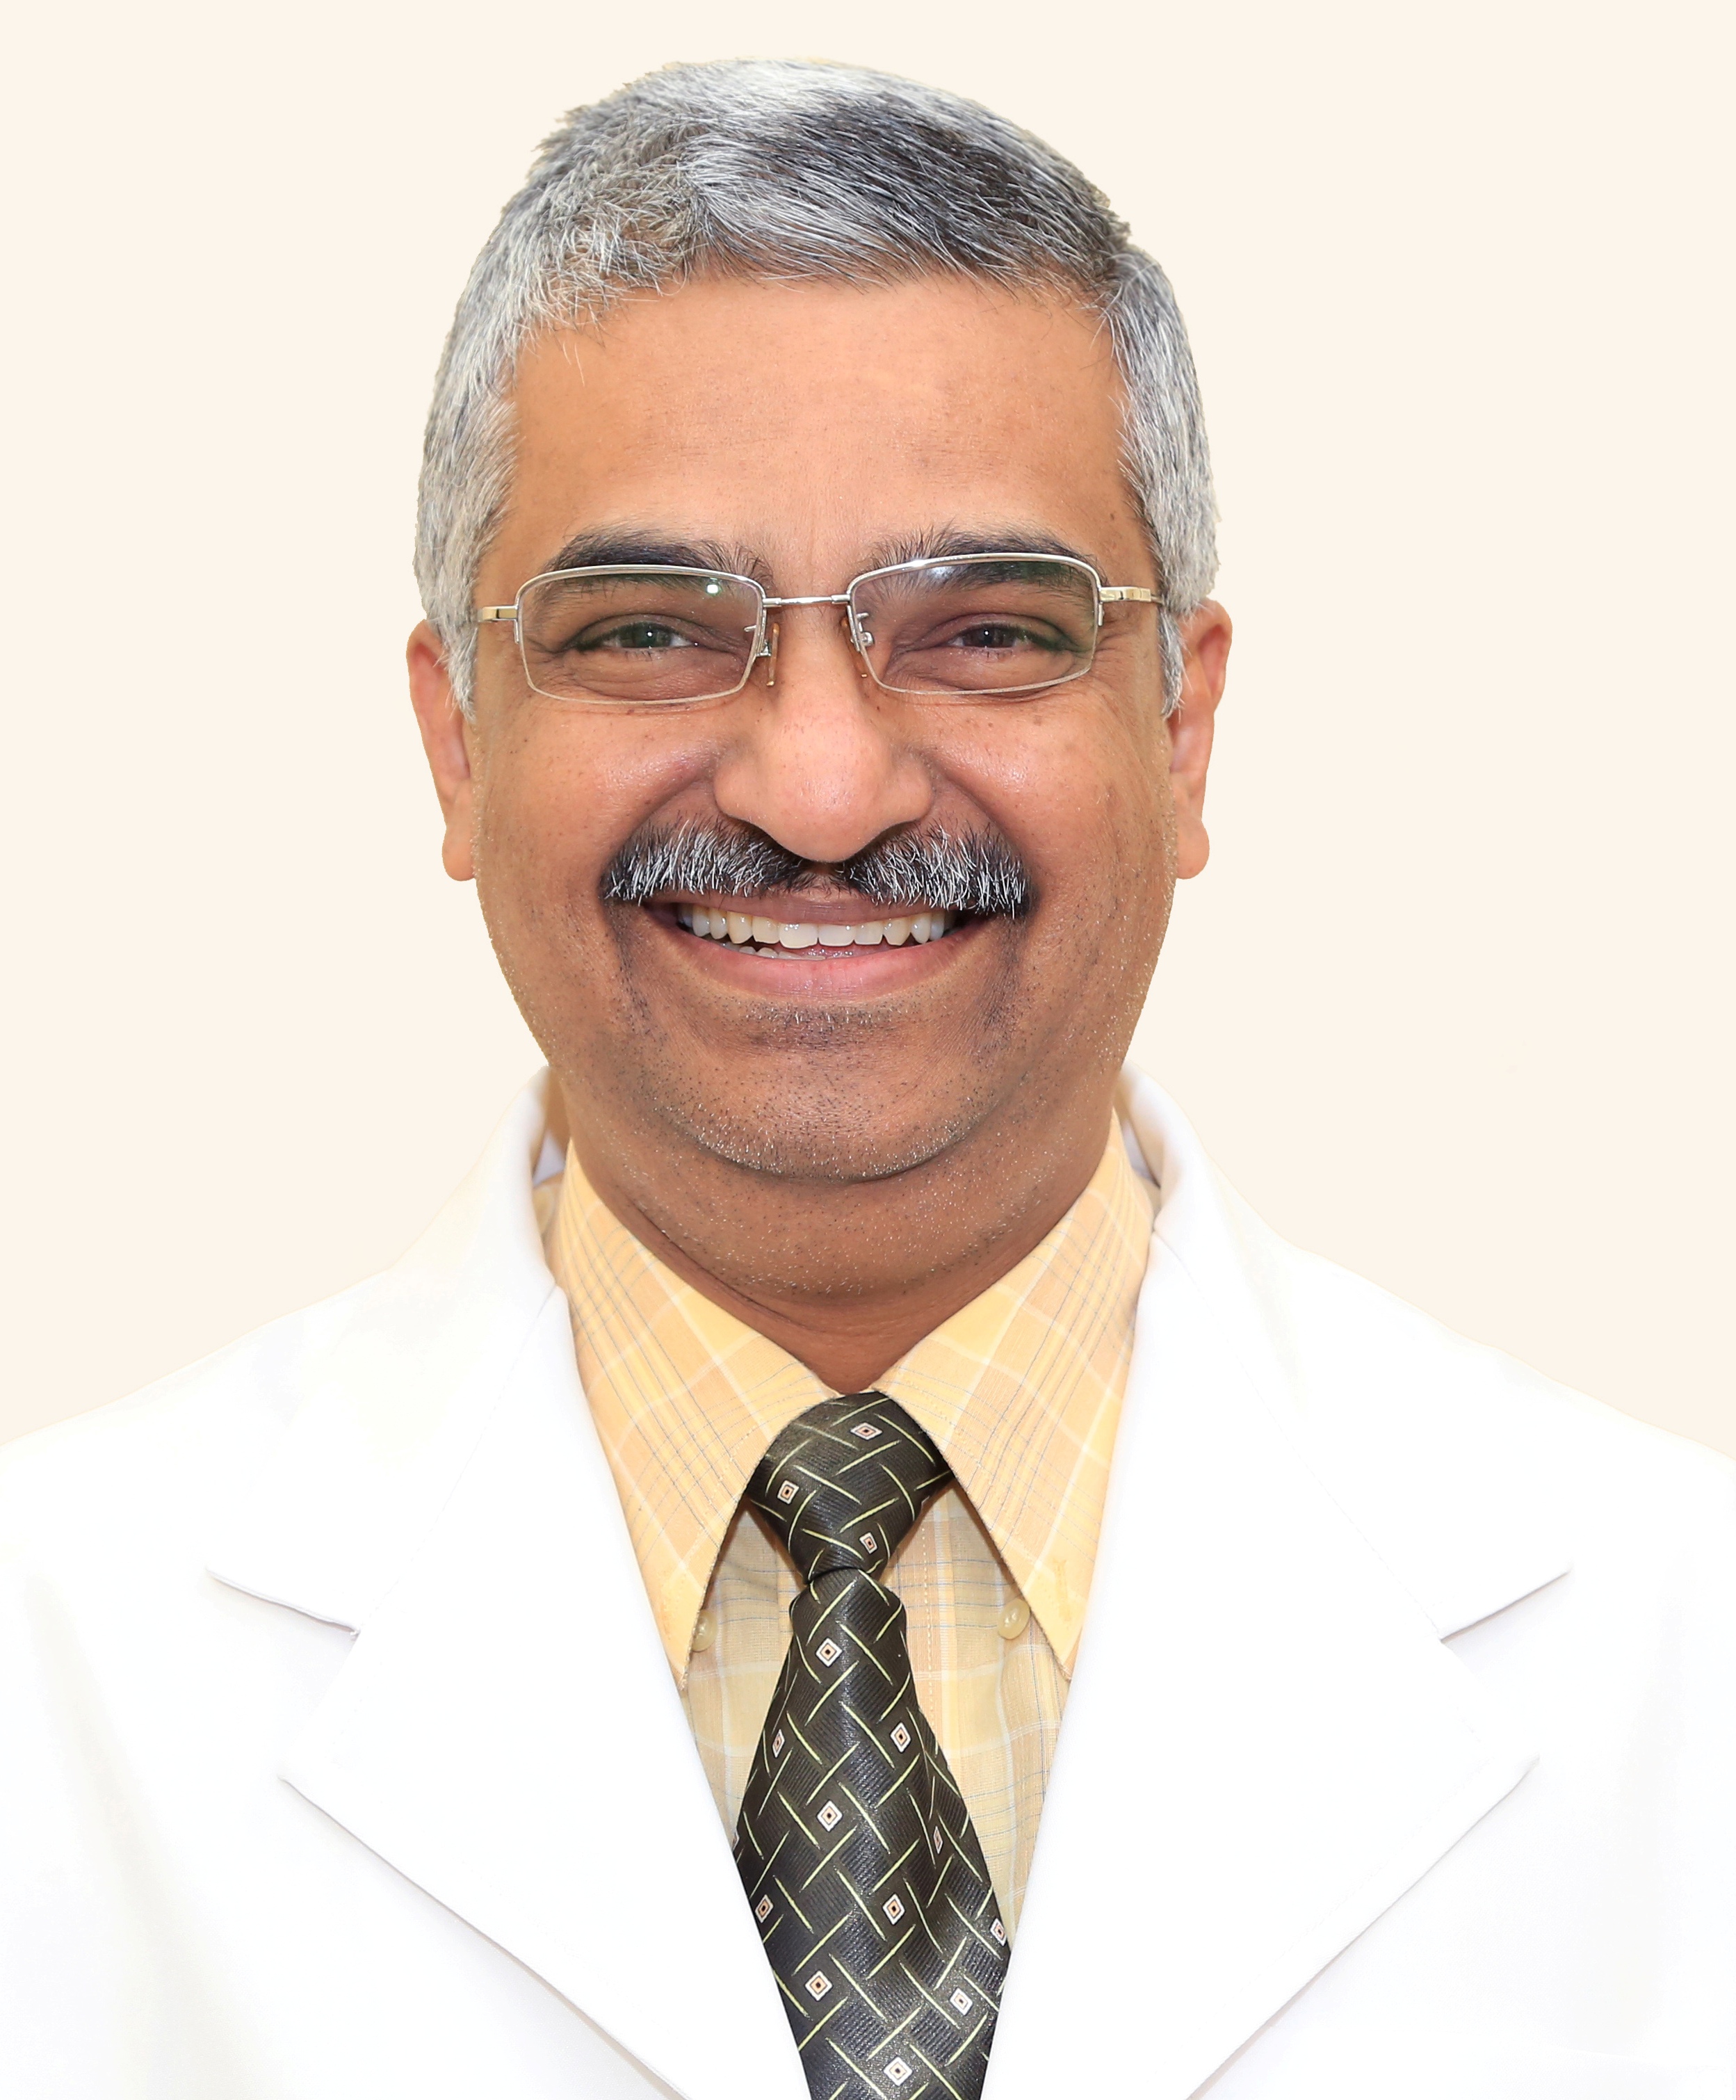 Profile picture of Dr. Anil Kumar Nair